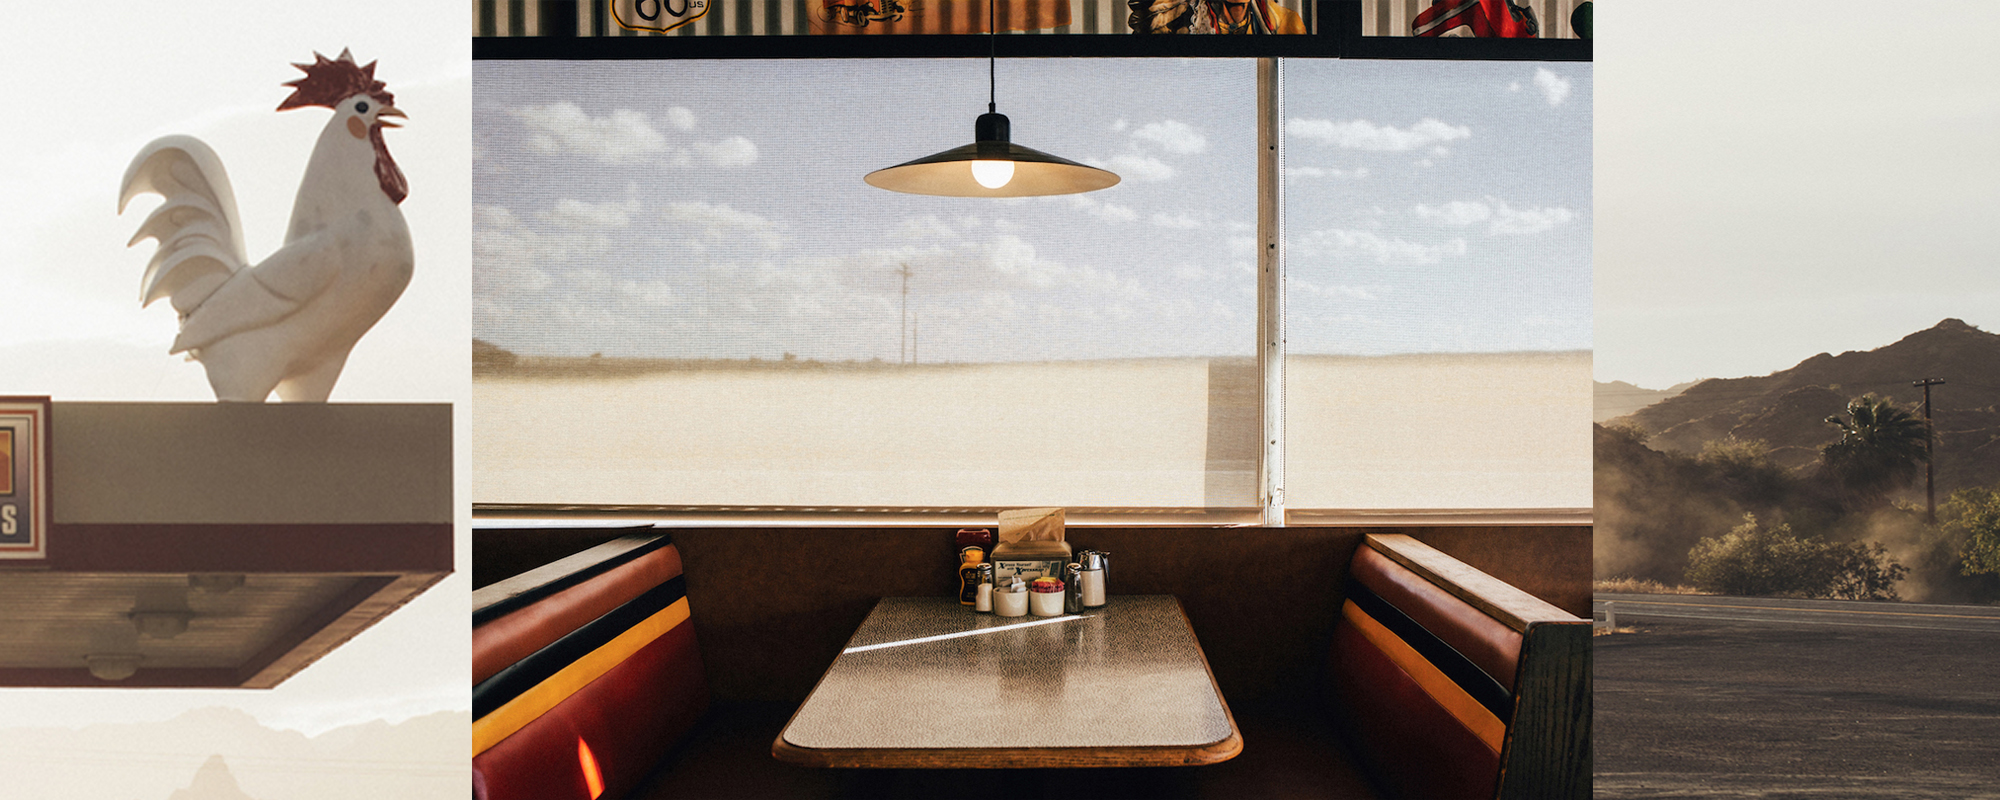 Arnaud Montagard: The Road, The Diner and the Drink on the Table – AMERICAN SUBURB X